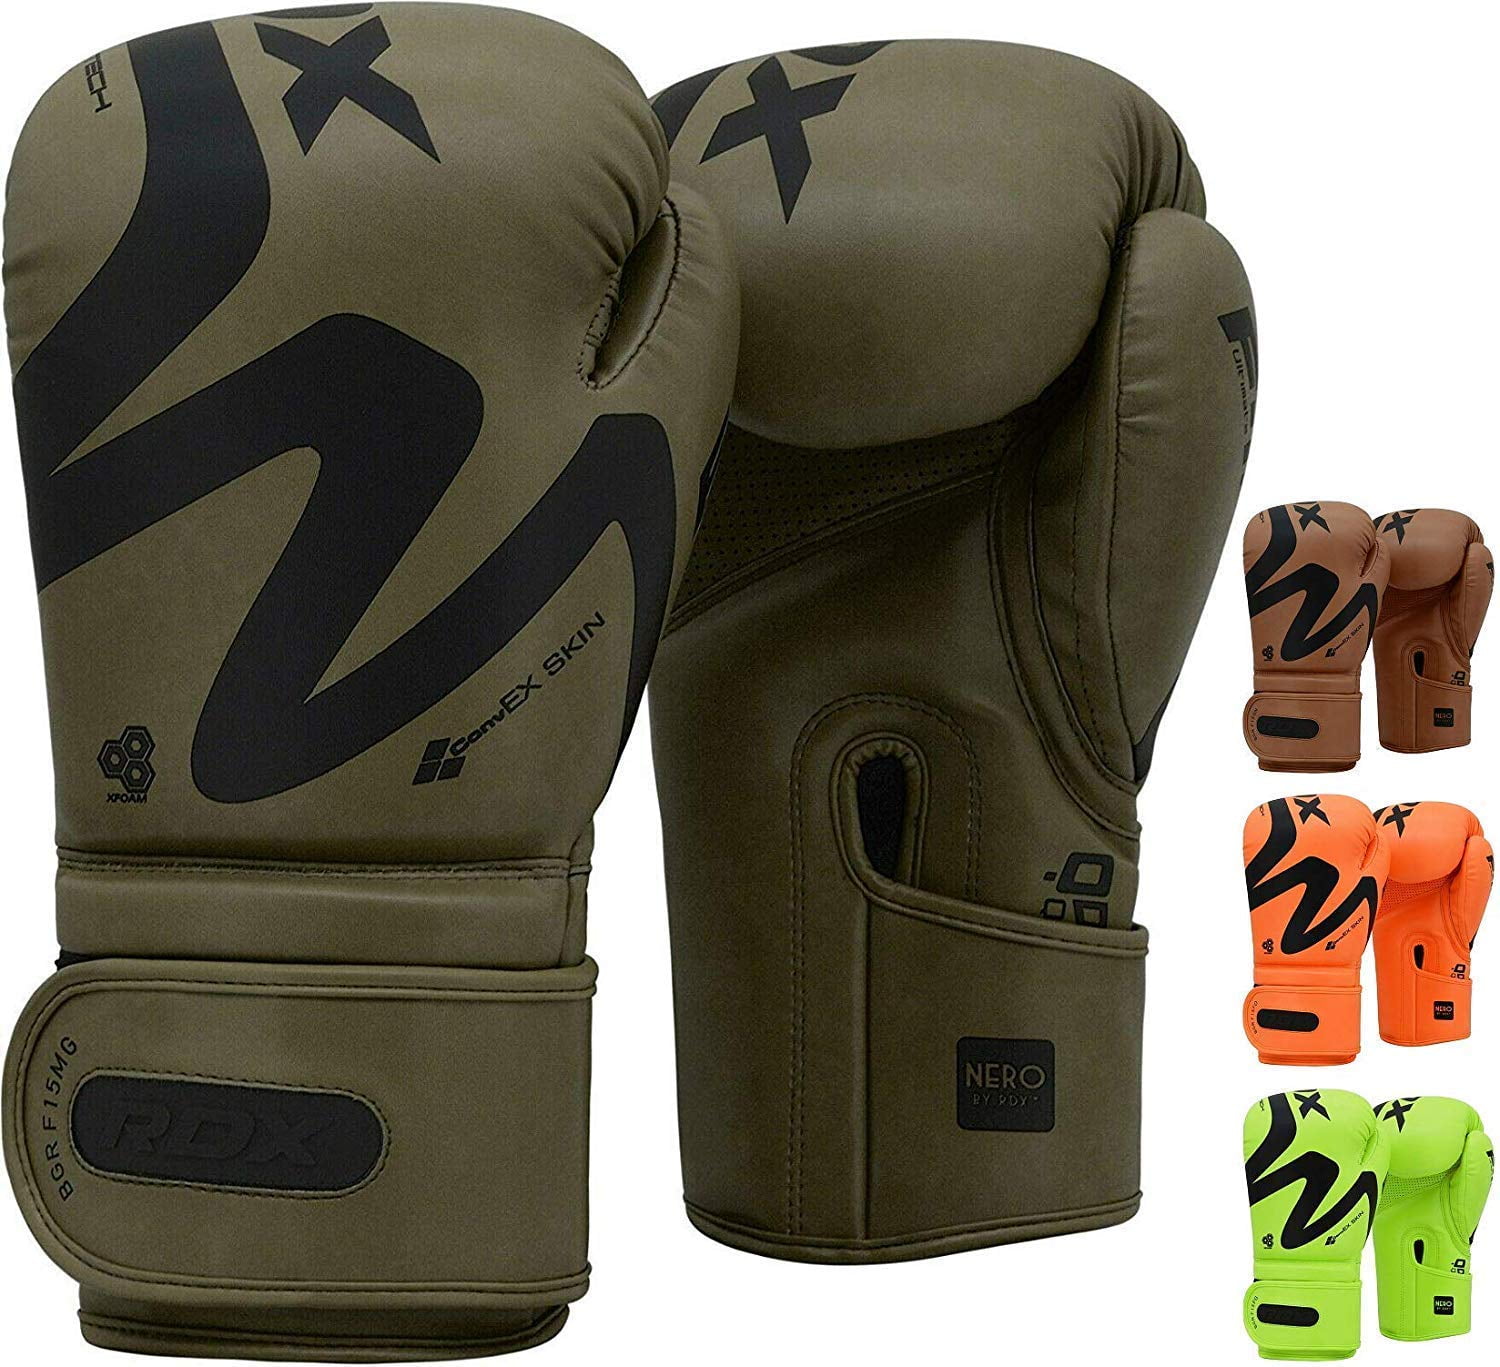 Punch Bags RDX Boxing Gloves for Training Muay Thai Maya Hide Leather Gloves for Sparring Double End Speed Ball Focus Pads Punching Kickboxing Fighting 